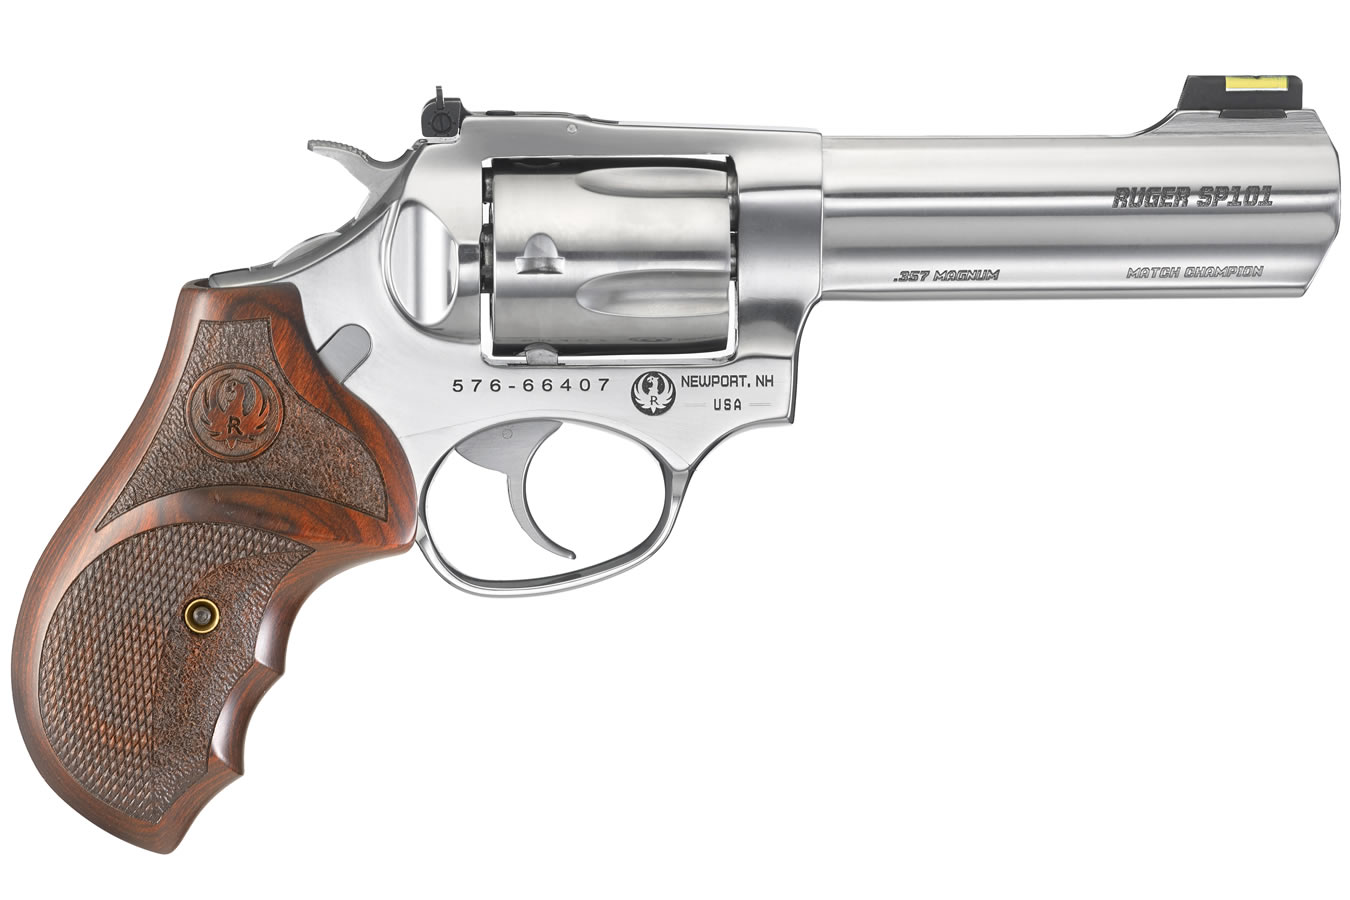 Ruger Sp101 Match Champion 357 Magnum Double-Action Revolver | Vance Outdoors